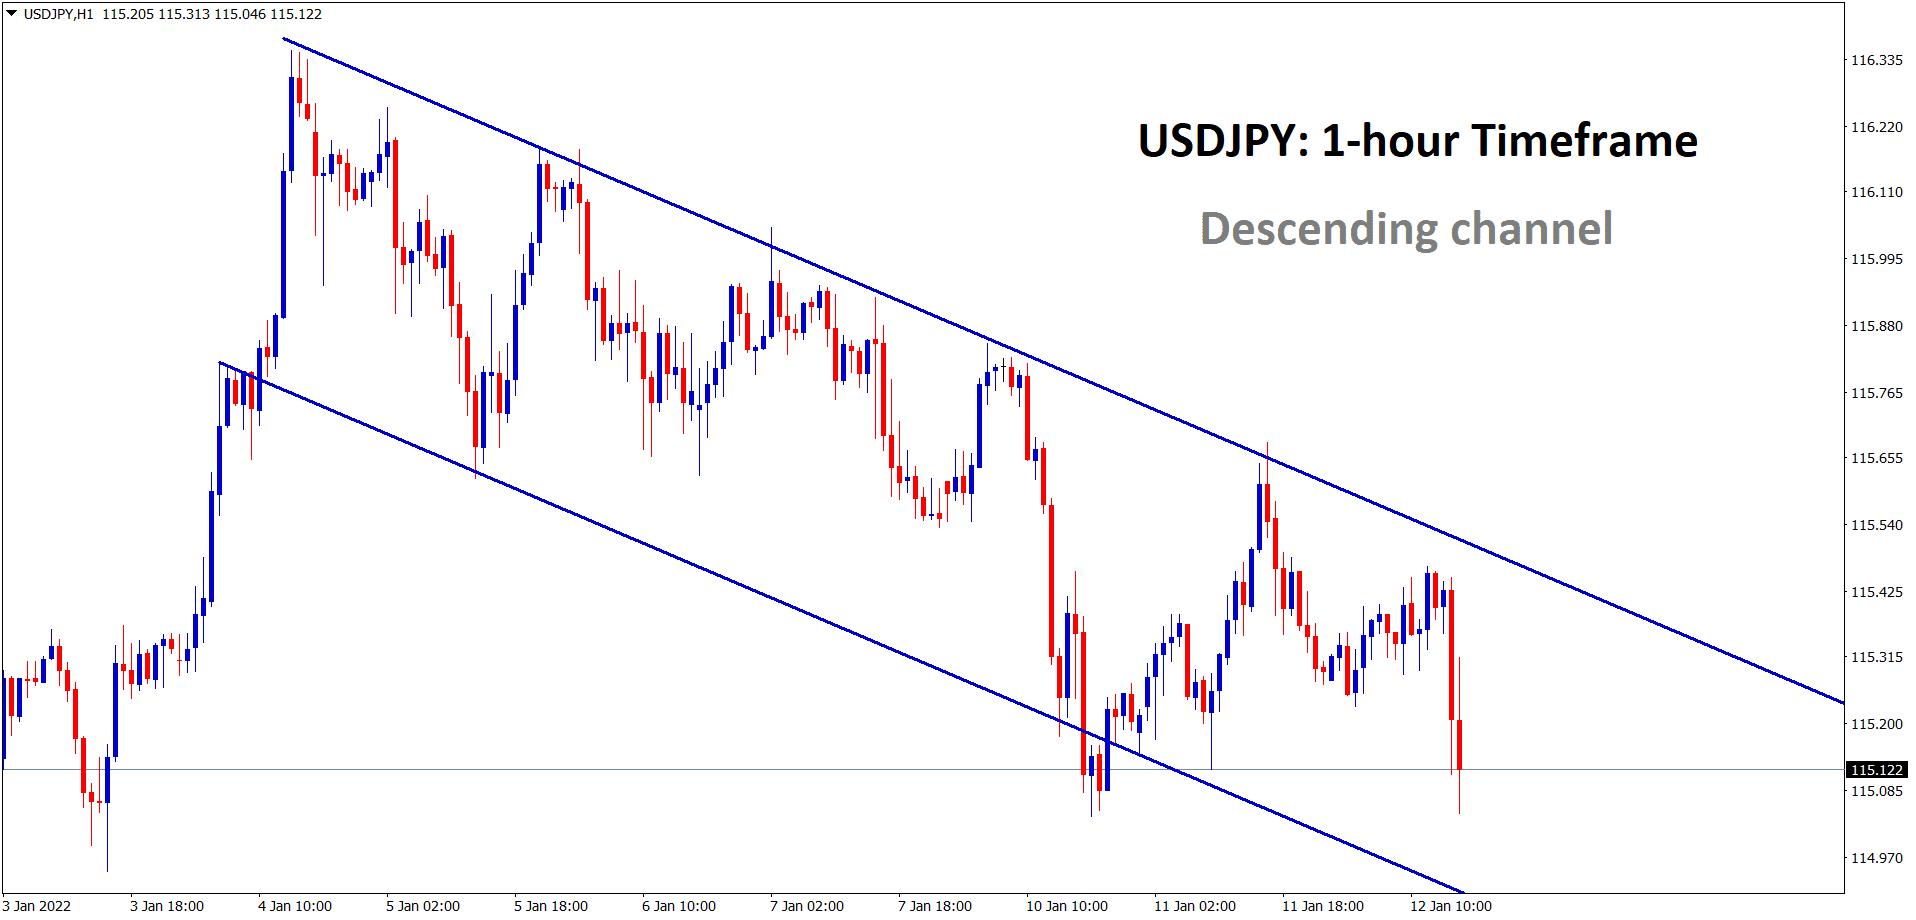 USDJPY is moving in a descending channel line in the hourly timeframe